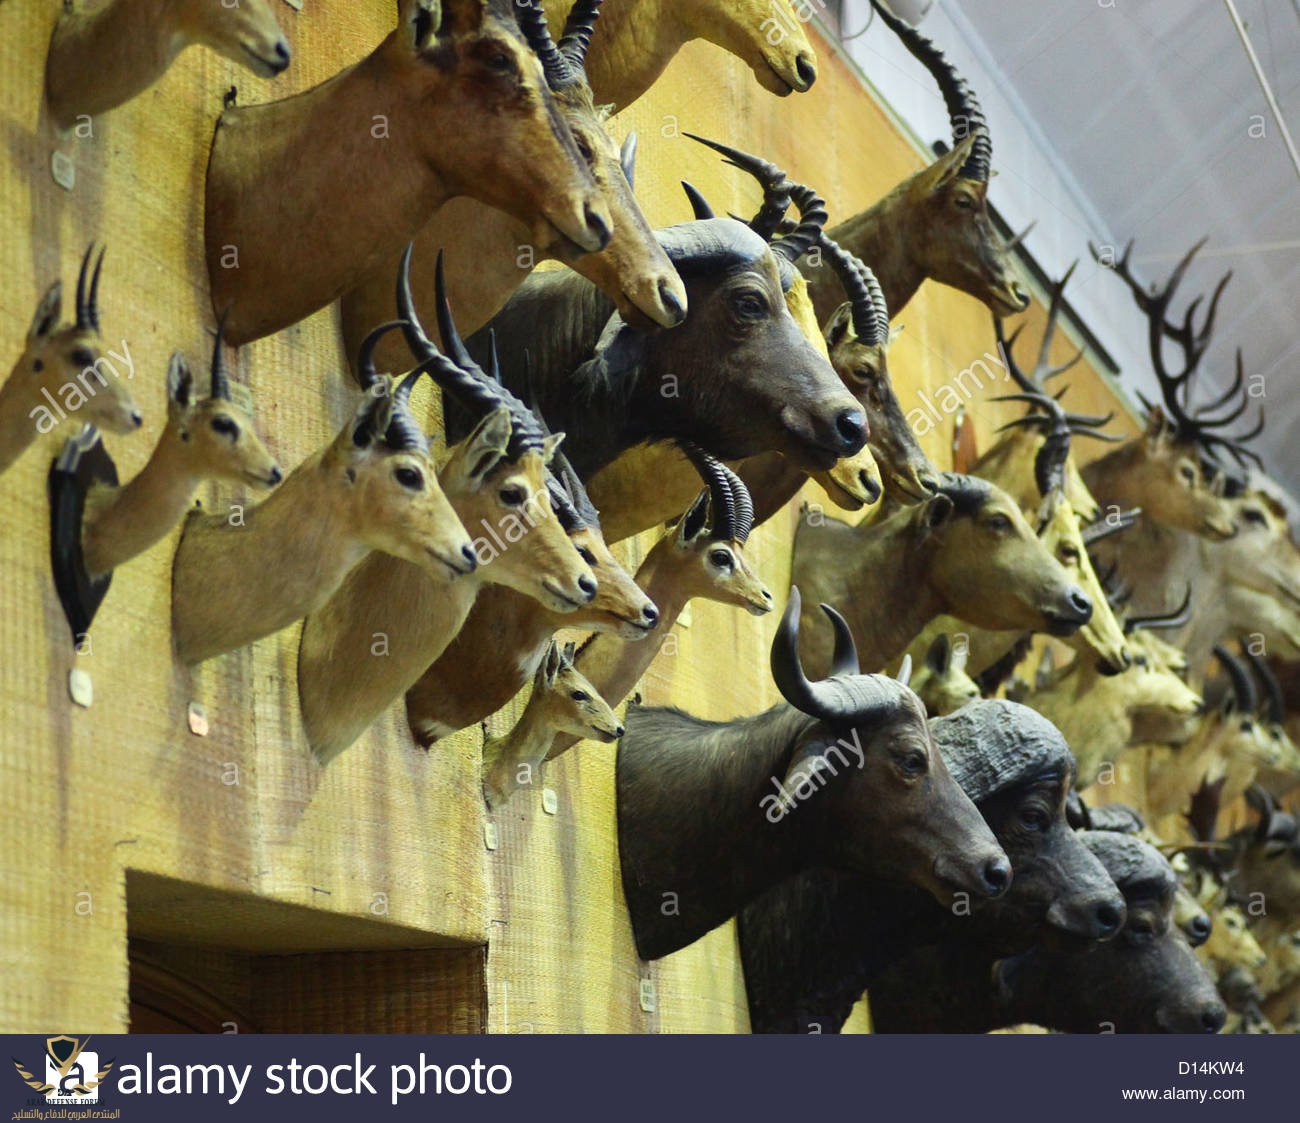 animal-heads-stuffed-and-mounted-on-a-wall-D14KW4.jpg